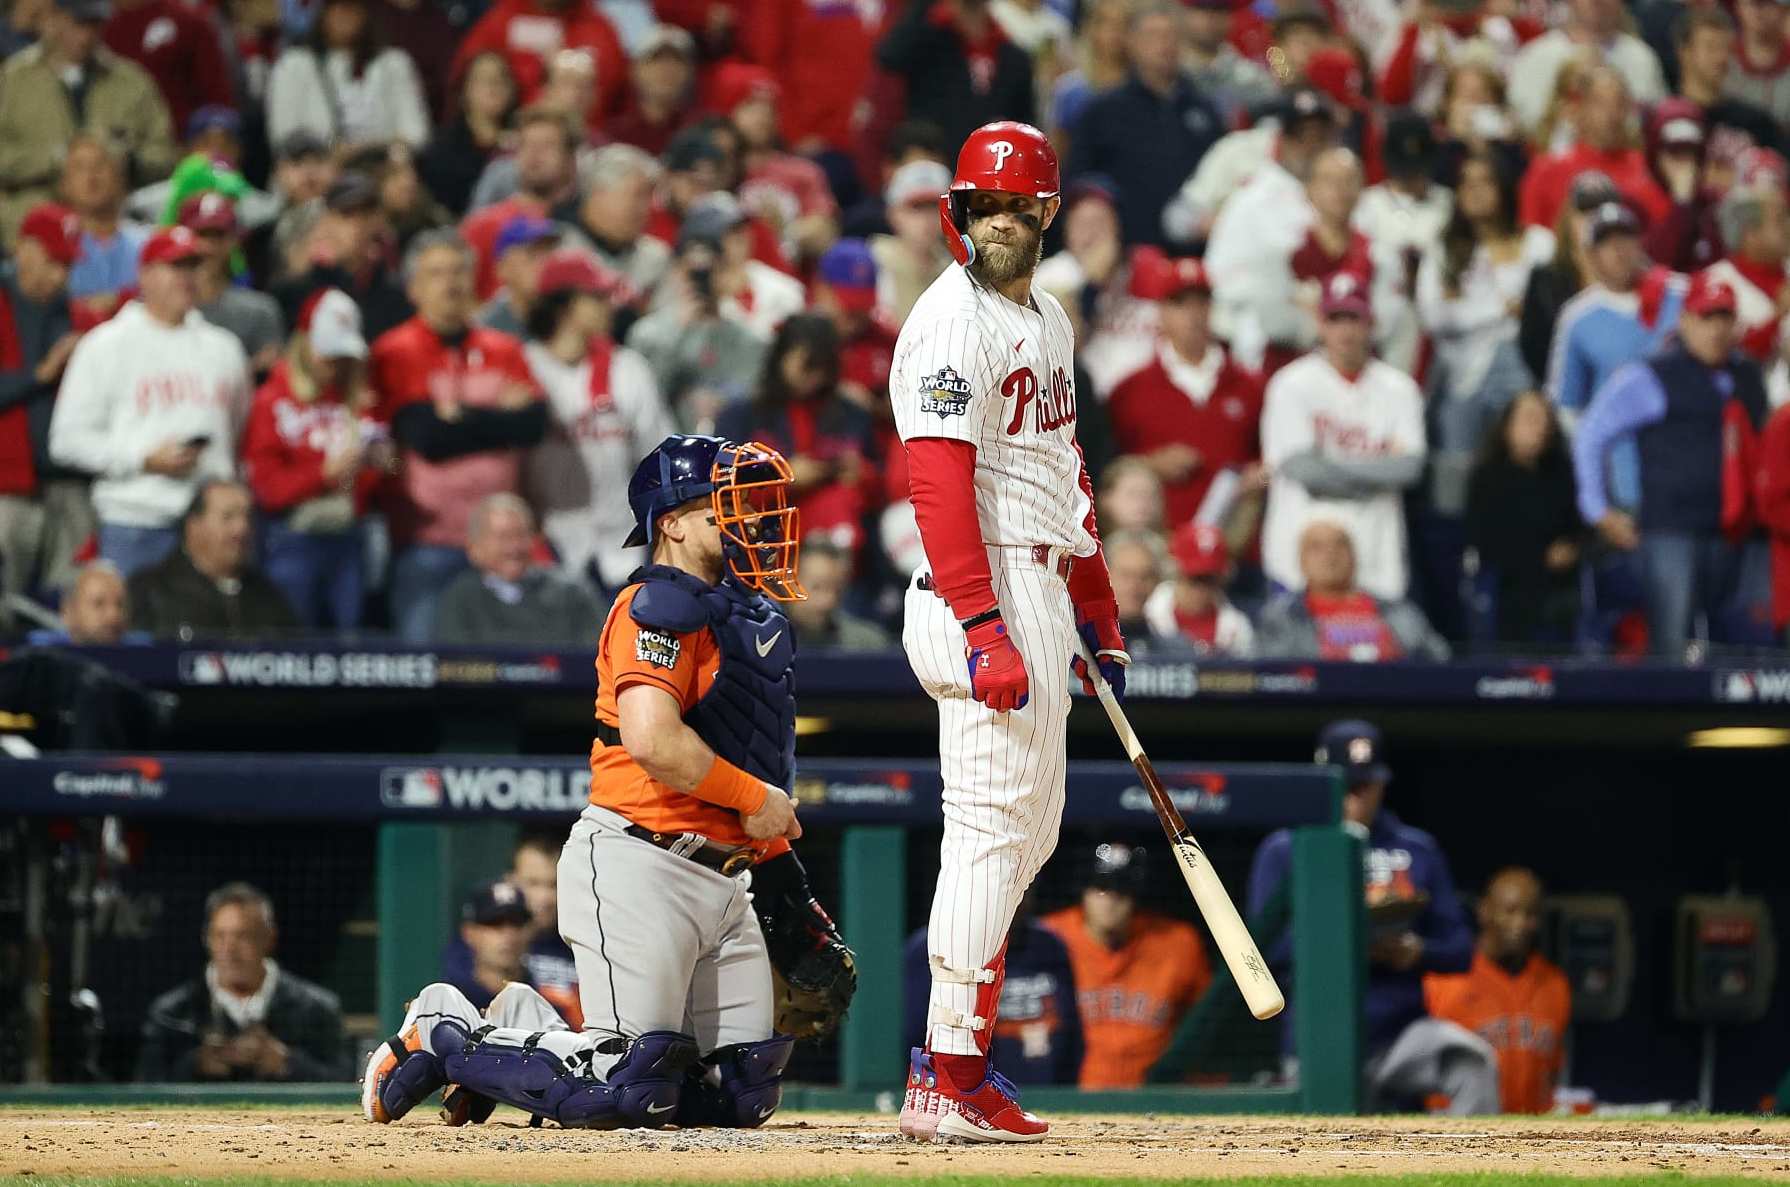 World Series storylines: 7 things to watch in Astros-Phillies